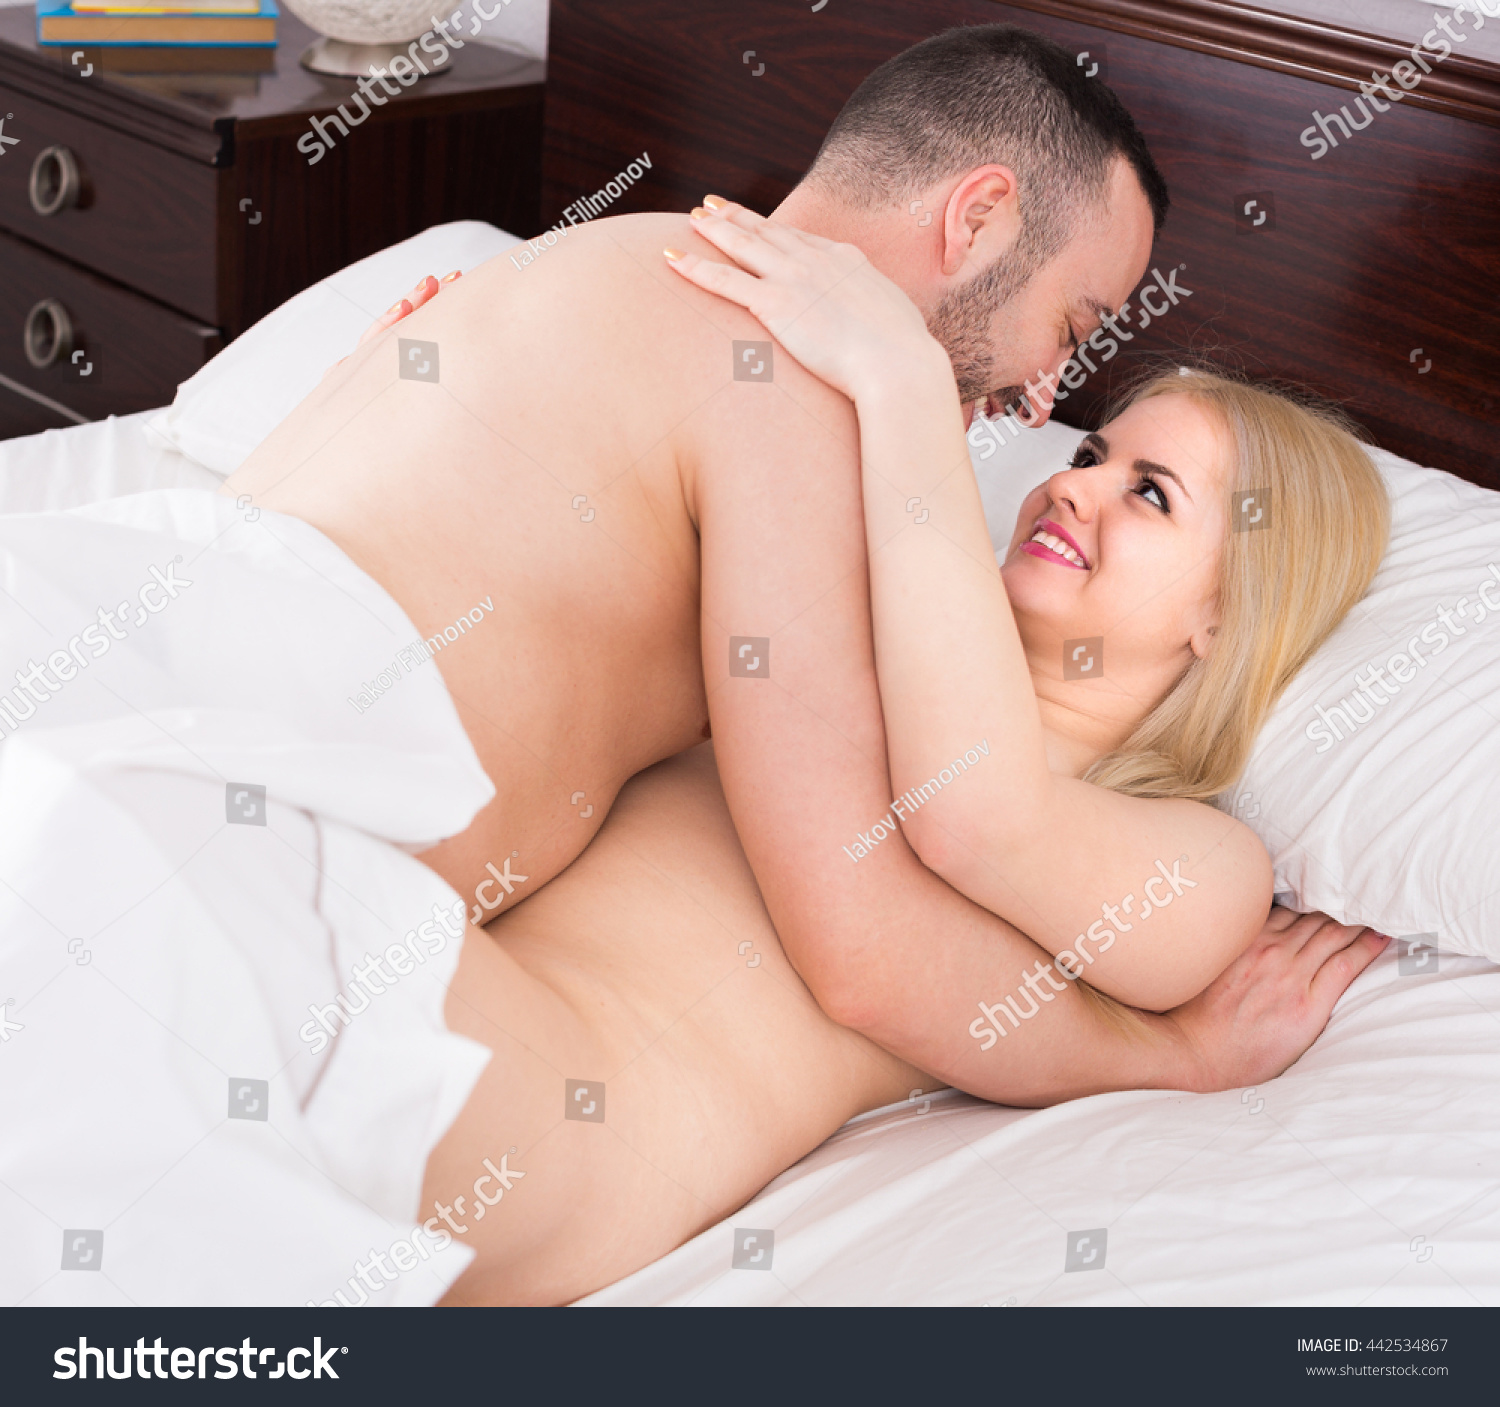 Pictures Of Couple Having Sex 92